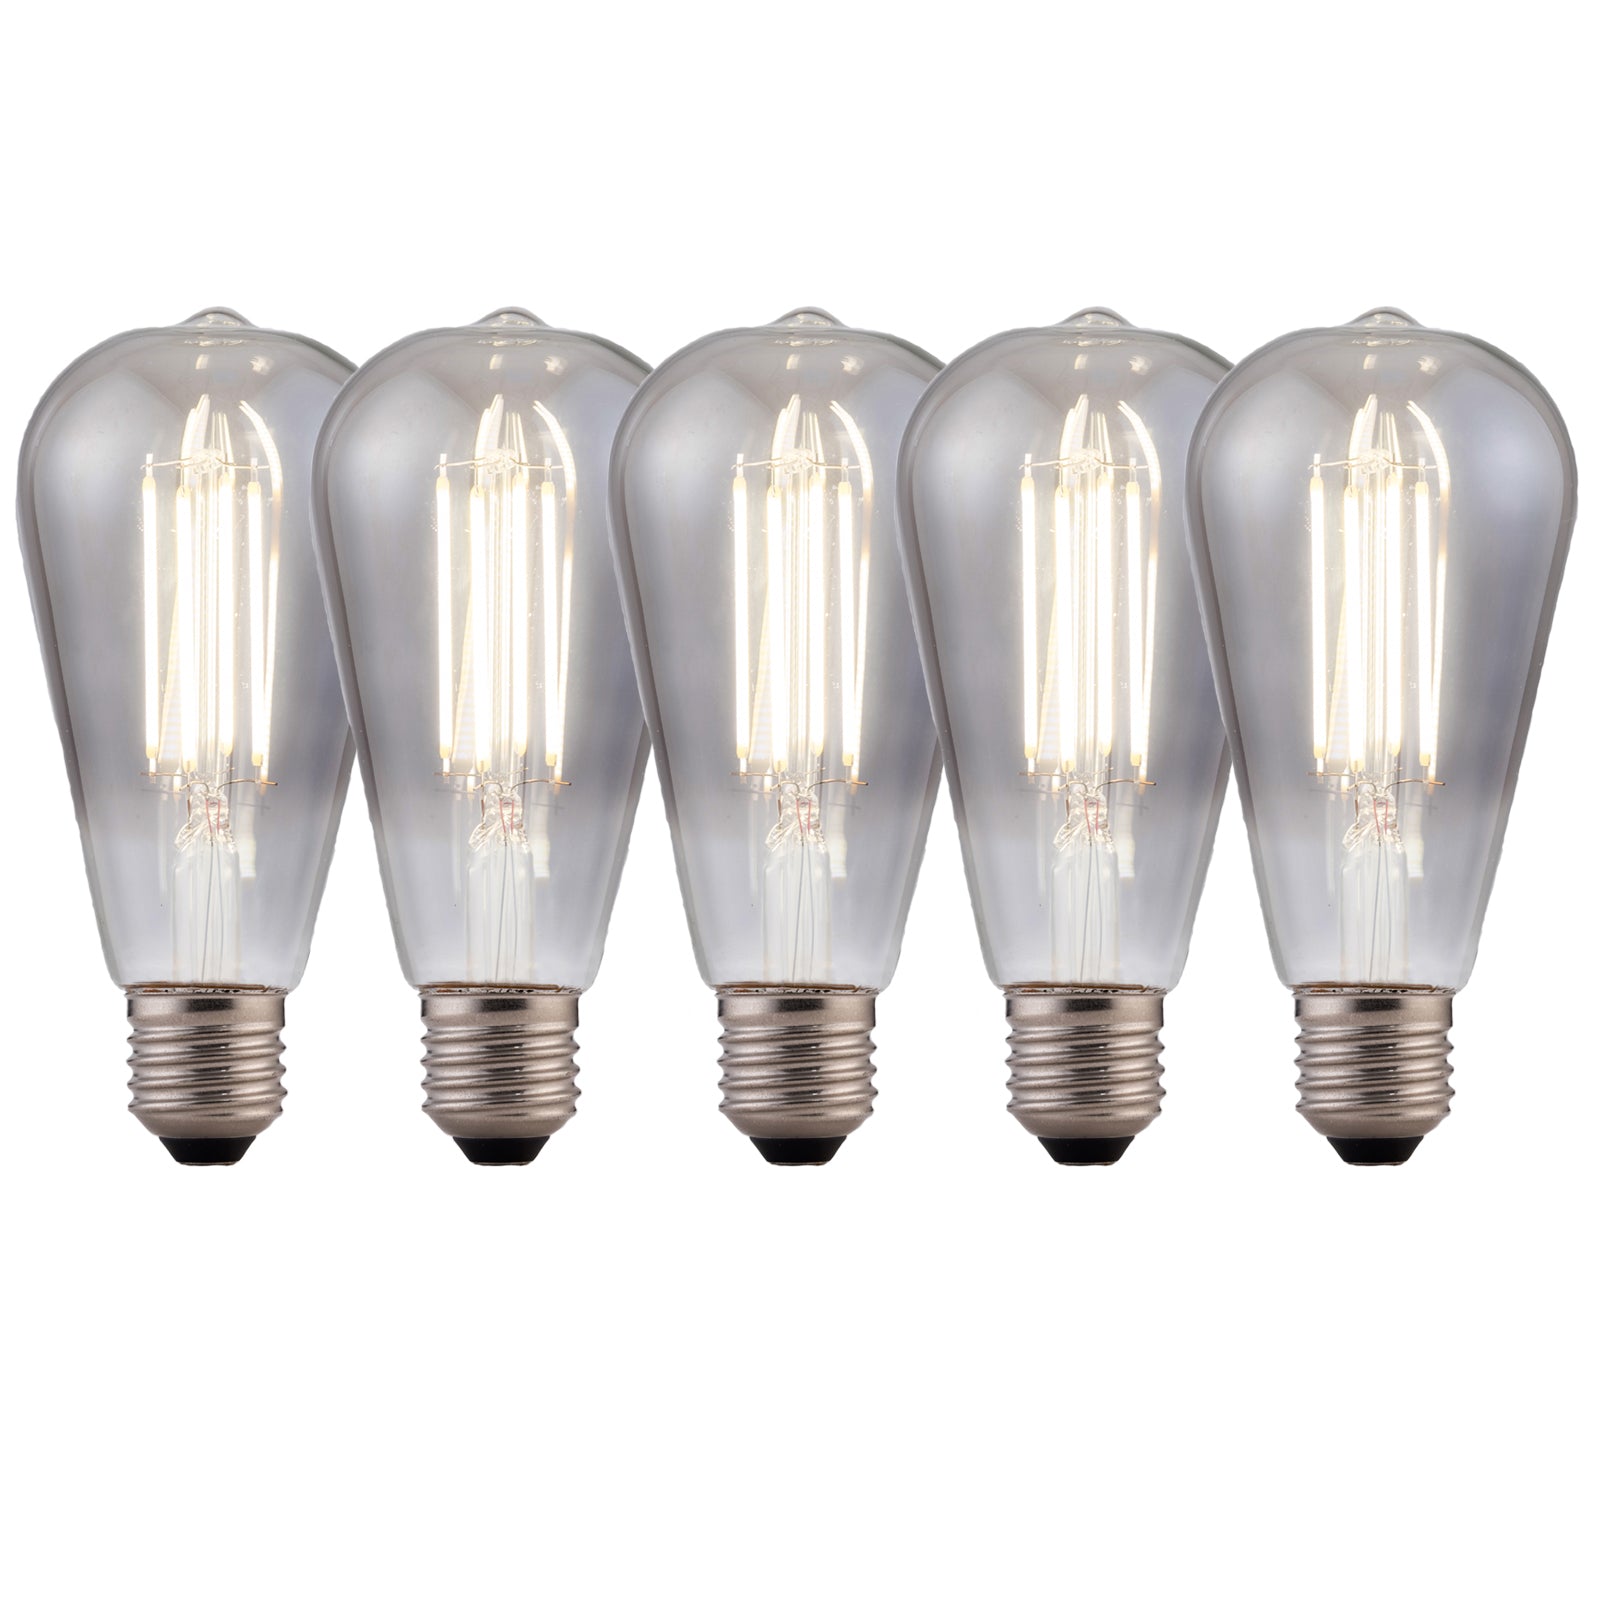 Harper Living ST64 Smoked Glass Squirrel Cage LED Bulb E27 Base, Pack of 5